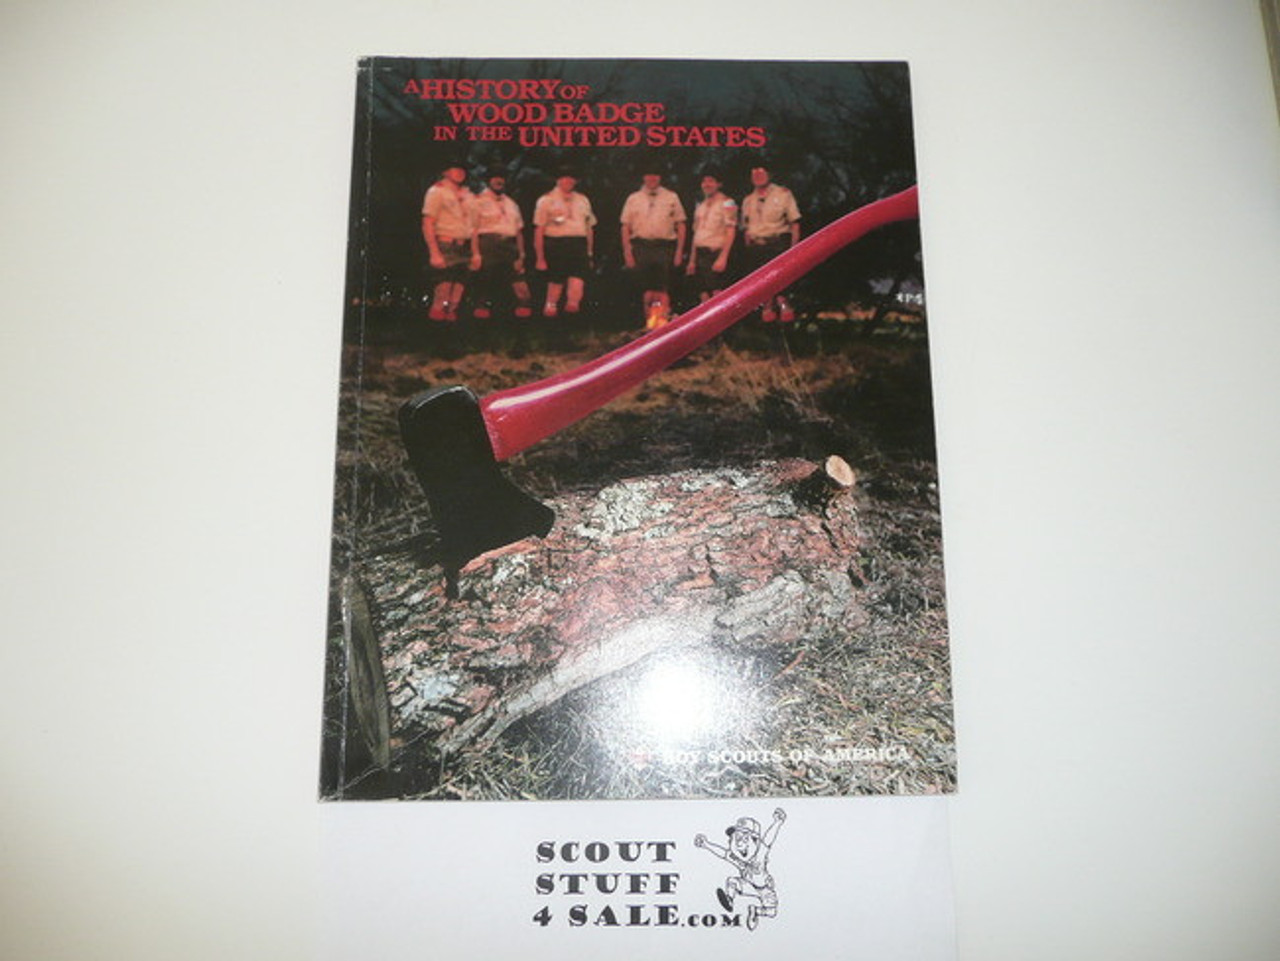 1988 A History of Wood Badge in the United States, First printing